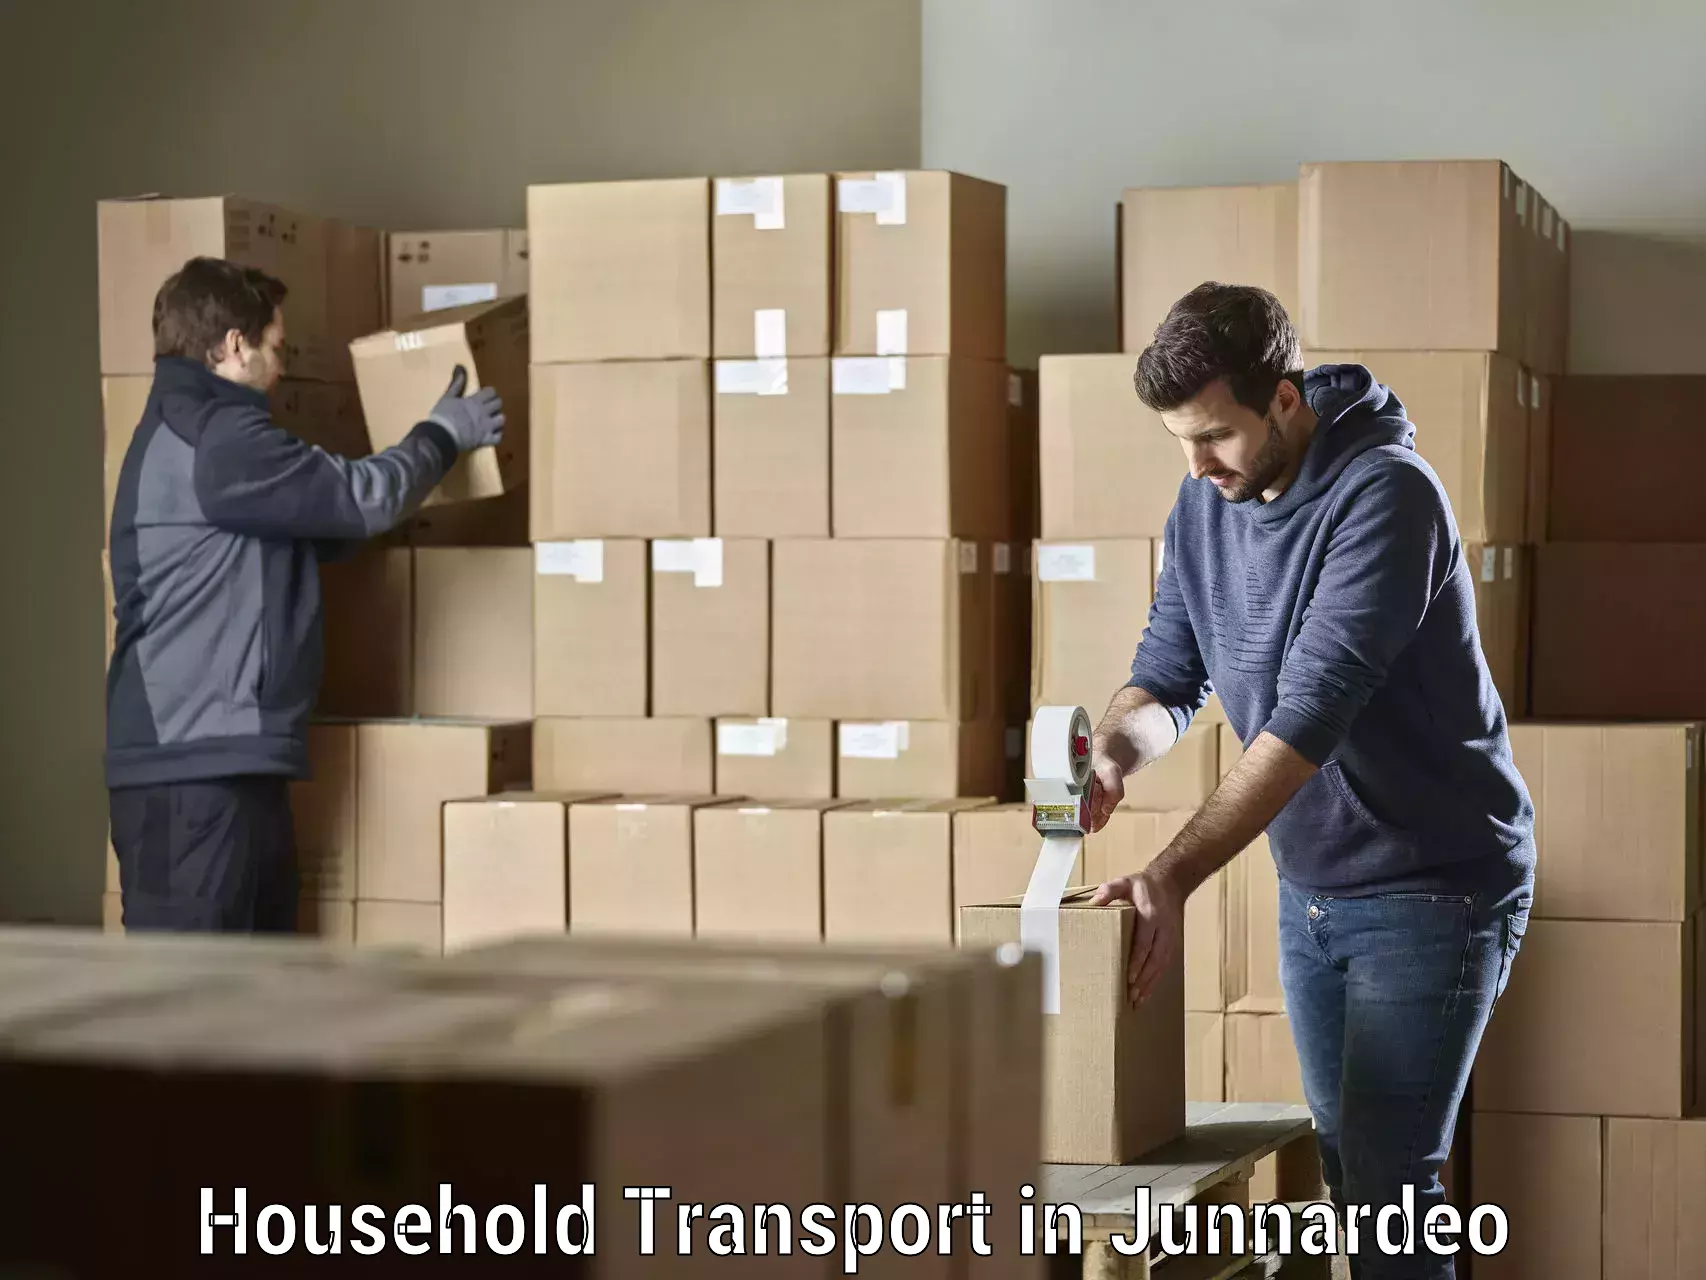 Expert furniture movers in Junnardeo